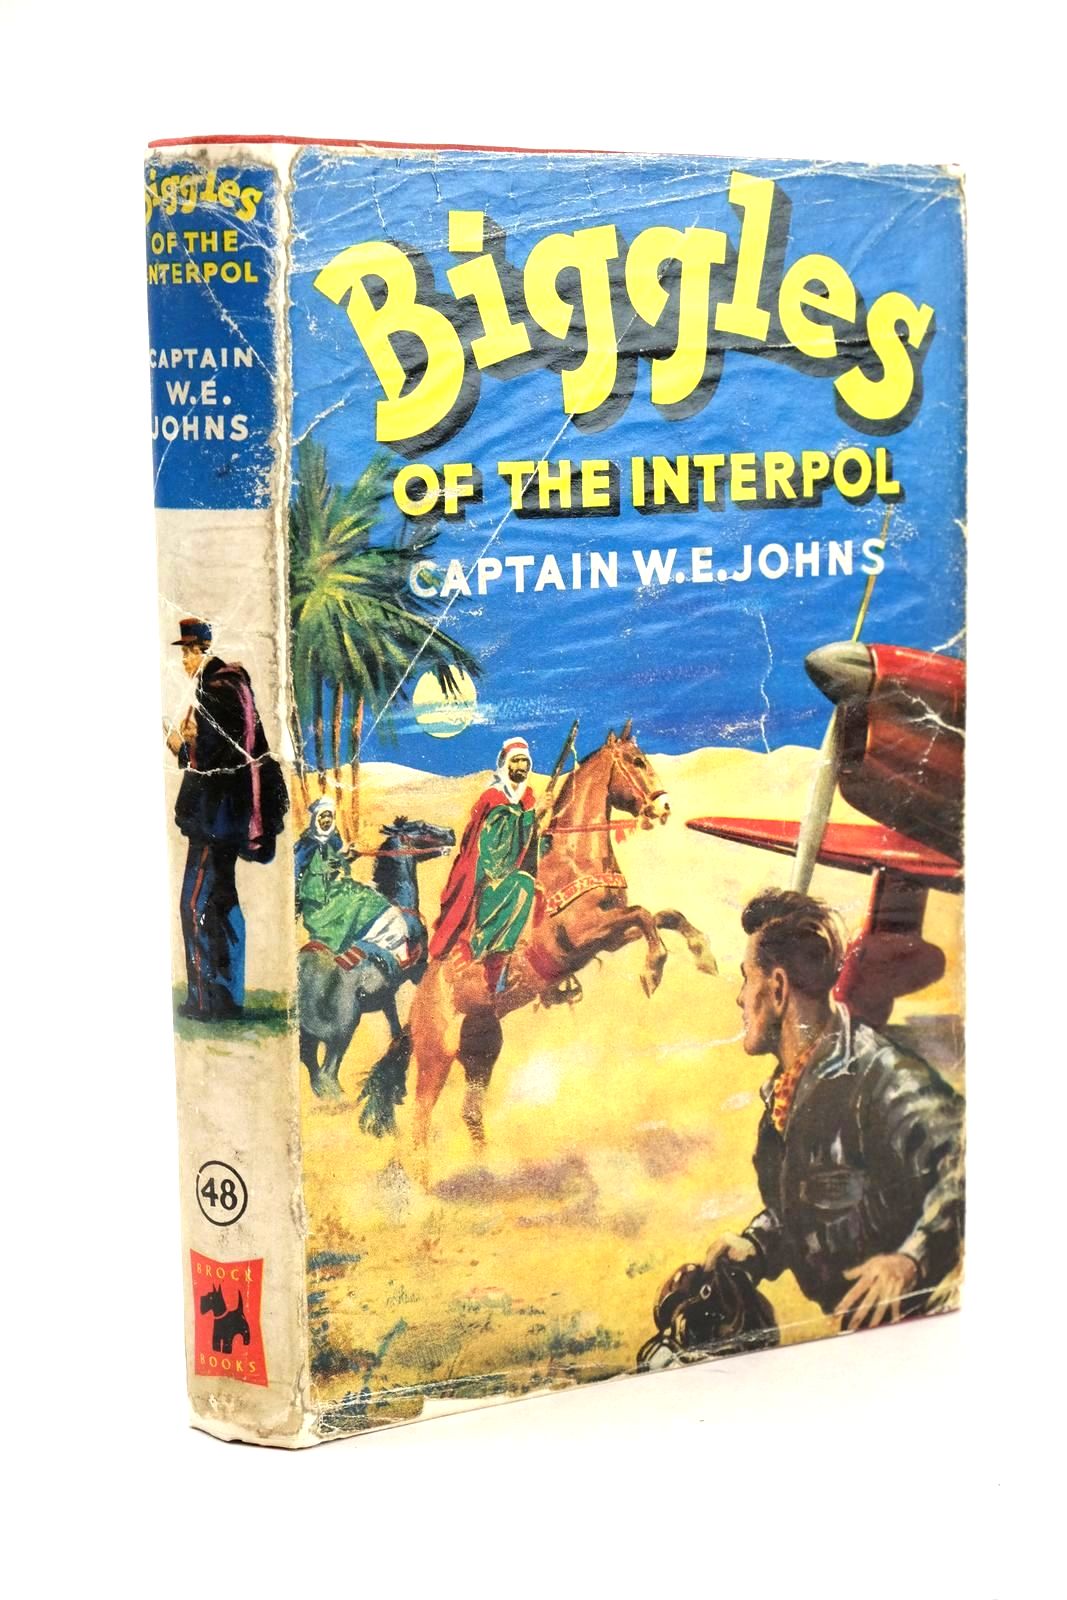 Photo of BIGGLES OF THE INTERPOL written by Johns, W.E. illustrated by Stead, Leslie published by Brockhampton Press (STOCK CODE: 1326192)  for sale by Stella & Rose's Books